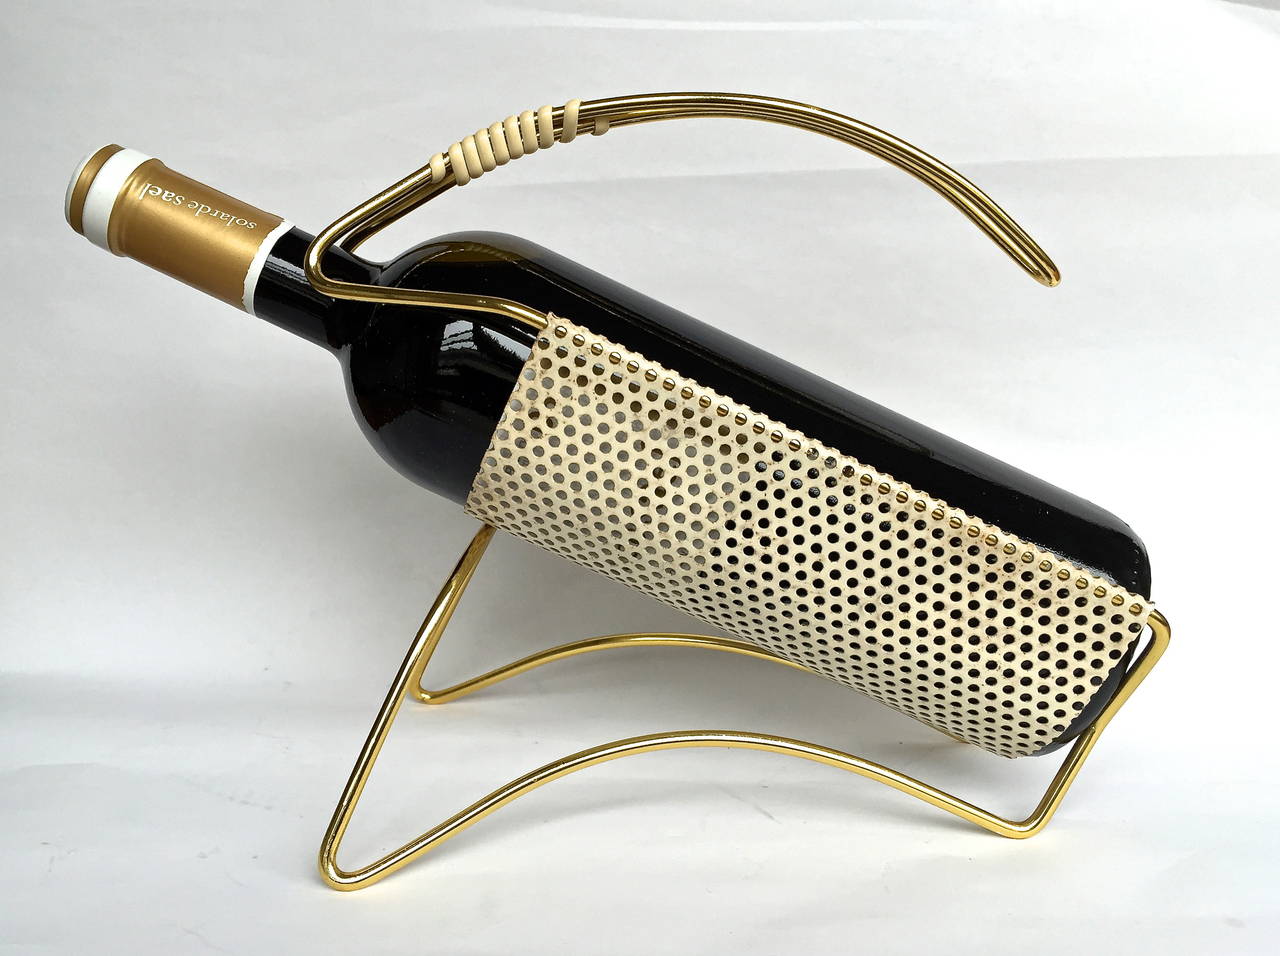 Gold-plated aluminum frame supports a white-painted pierced-steel cradle for wine decanting. Great 1950s French design after Mathieu Matêgot.